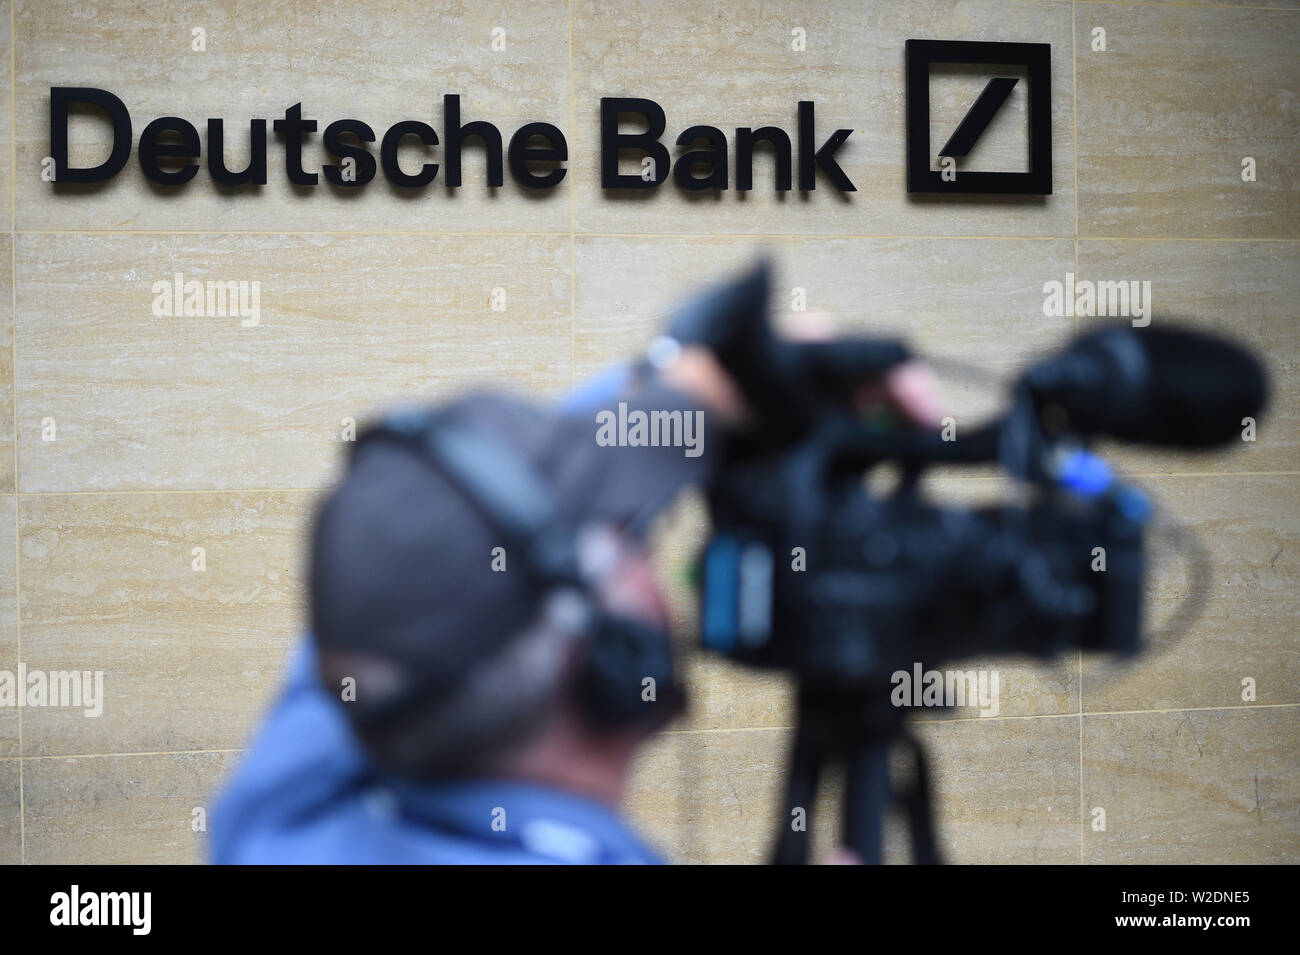 A news camerman outside the London office of Deutsche Bank which has confirmed plans to cut 18,000 positions across its global business, causing thousands of workers in the City of London to fear for their jobs. Stock Photo